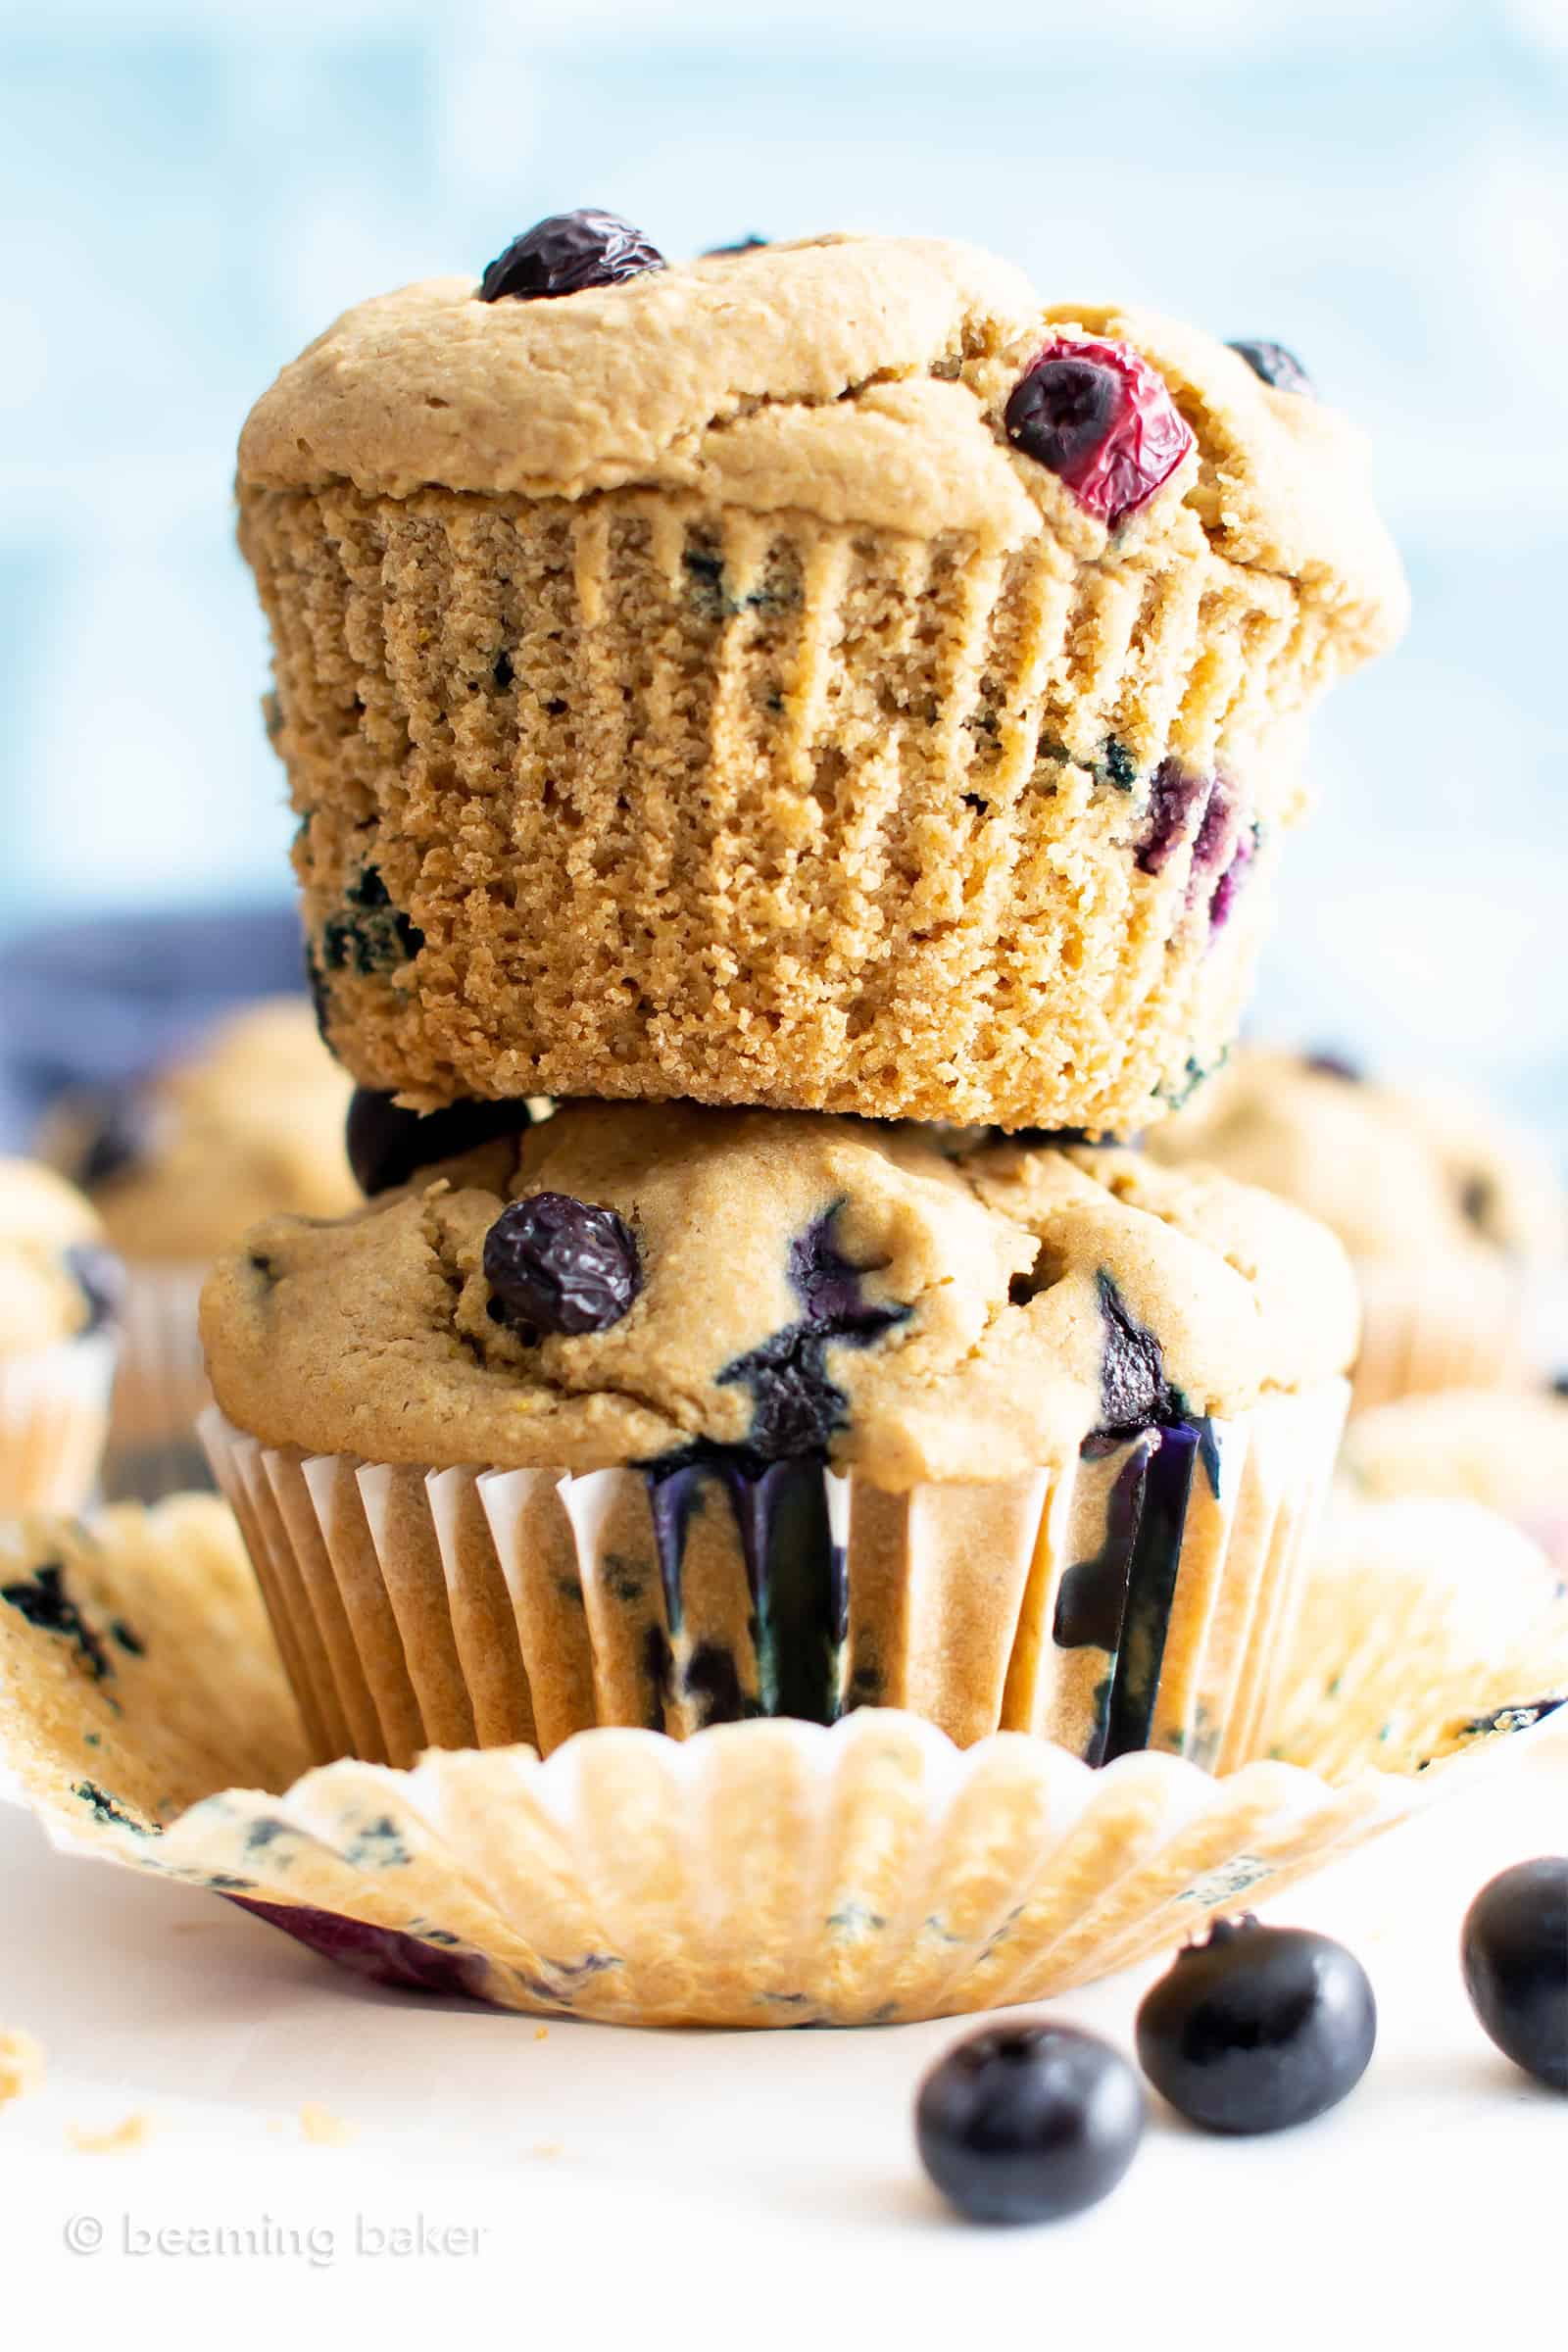 Healthy Vegan Gluten Free Blueberry Muffins: my favorite vegan gluten free blueberry muffins are easy ‘n moist! The best healthy blueberry muffin recipe—made with oat flour and healthy ingredients! #Healthy #Muffins #Vegan #GlutenFree #Blueberry | Recipe at BeamingBaker.com